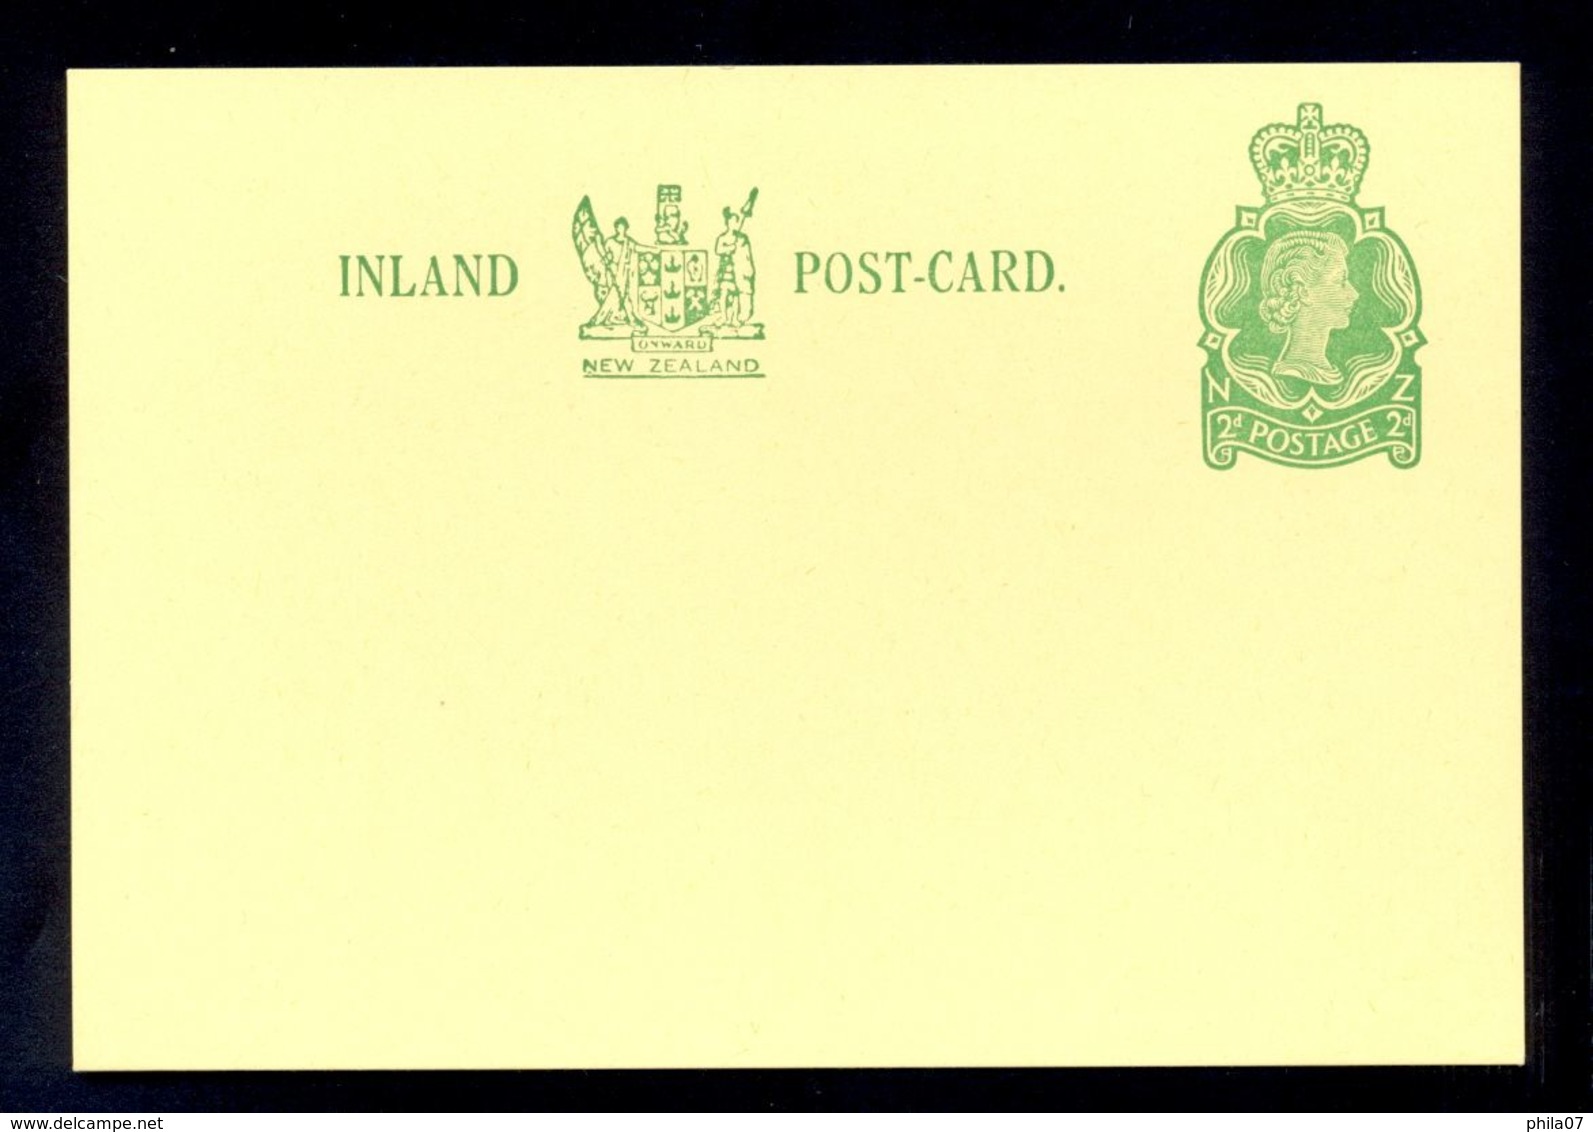 NEW ZEALAND - INLAND - Post-card With Imprinted Value, Not Traveled In Good Condition. - Enteros Postales